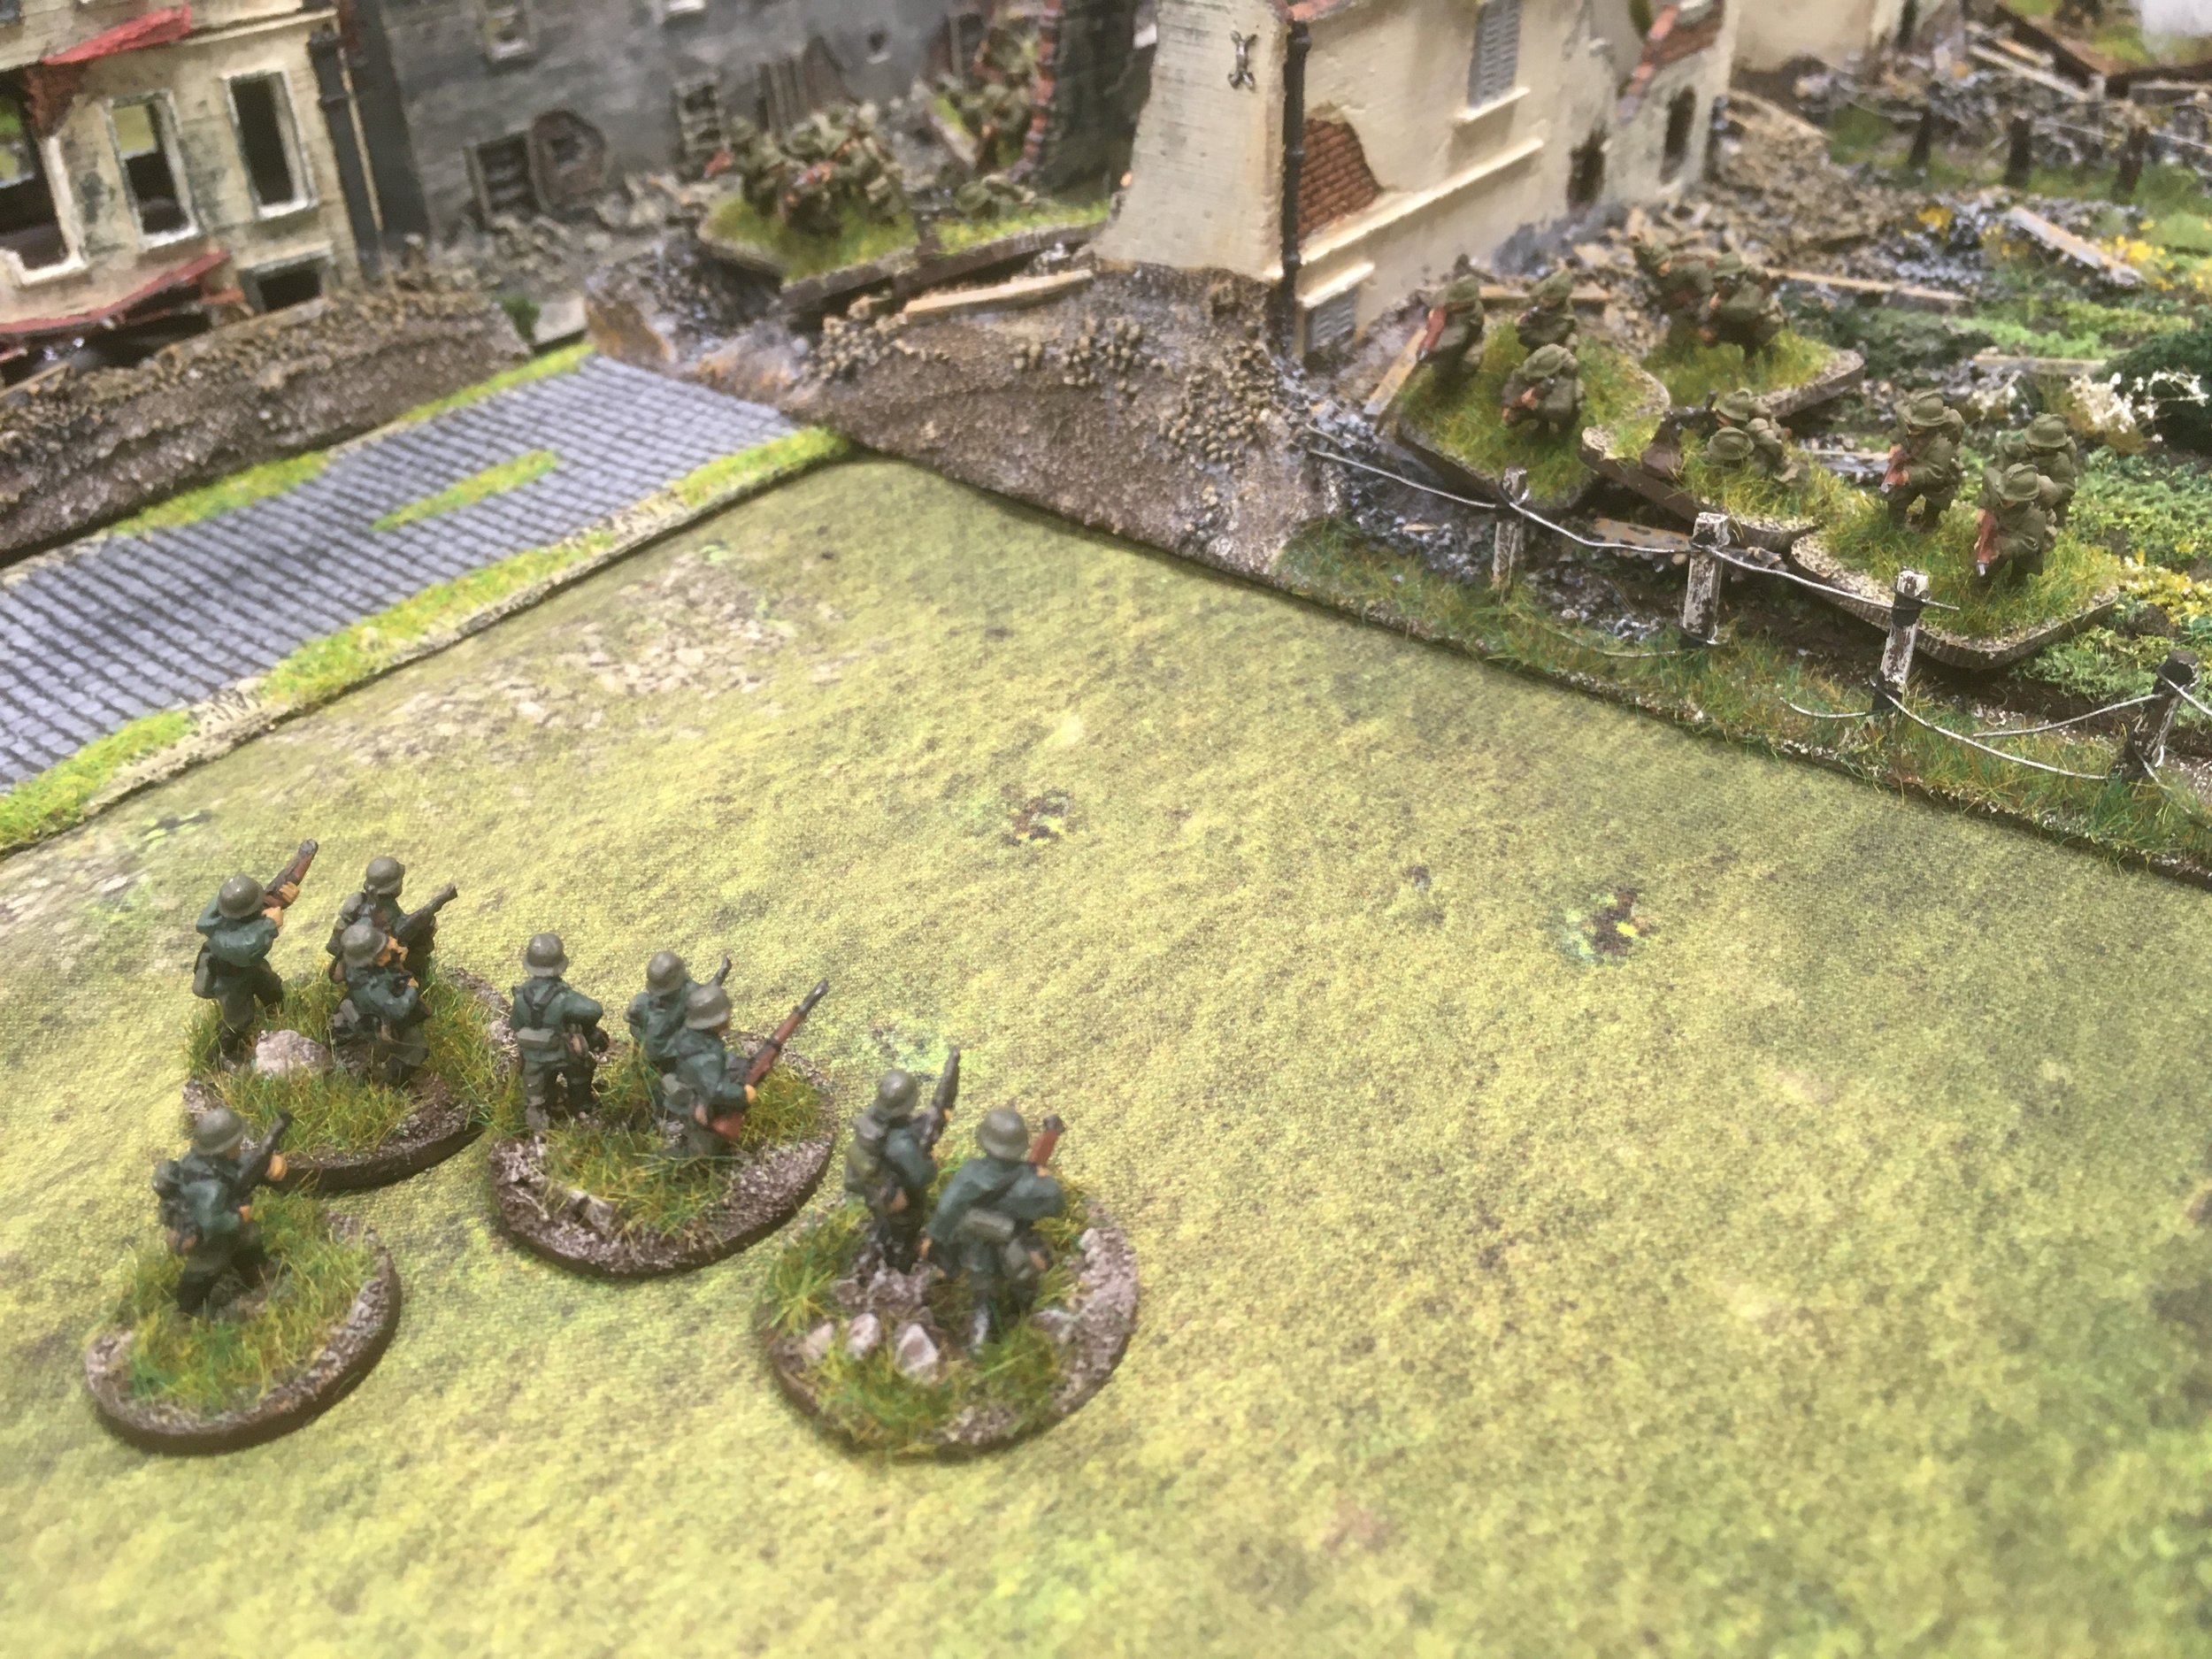 Into the face of sustained fire from a second French infantry platoon hidden in the ruins.